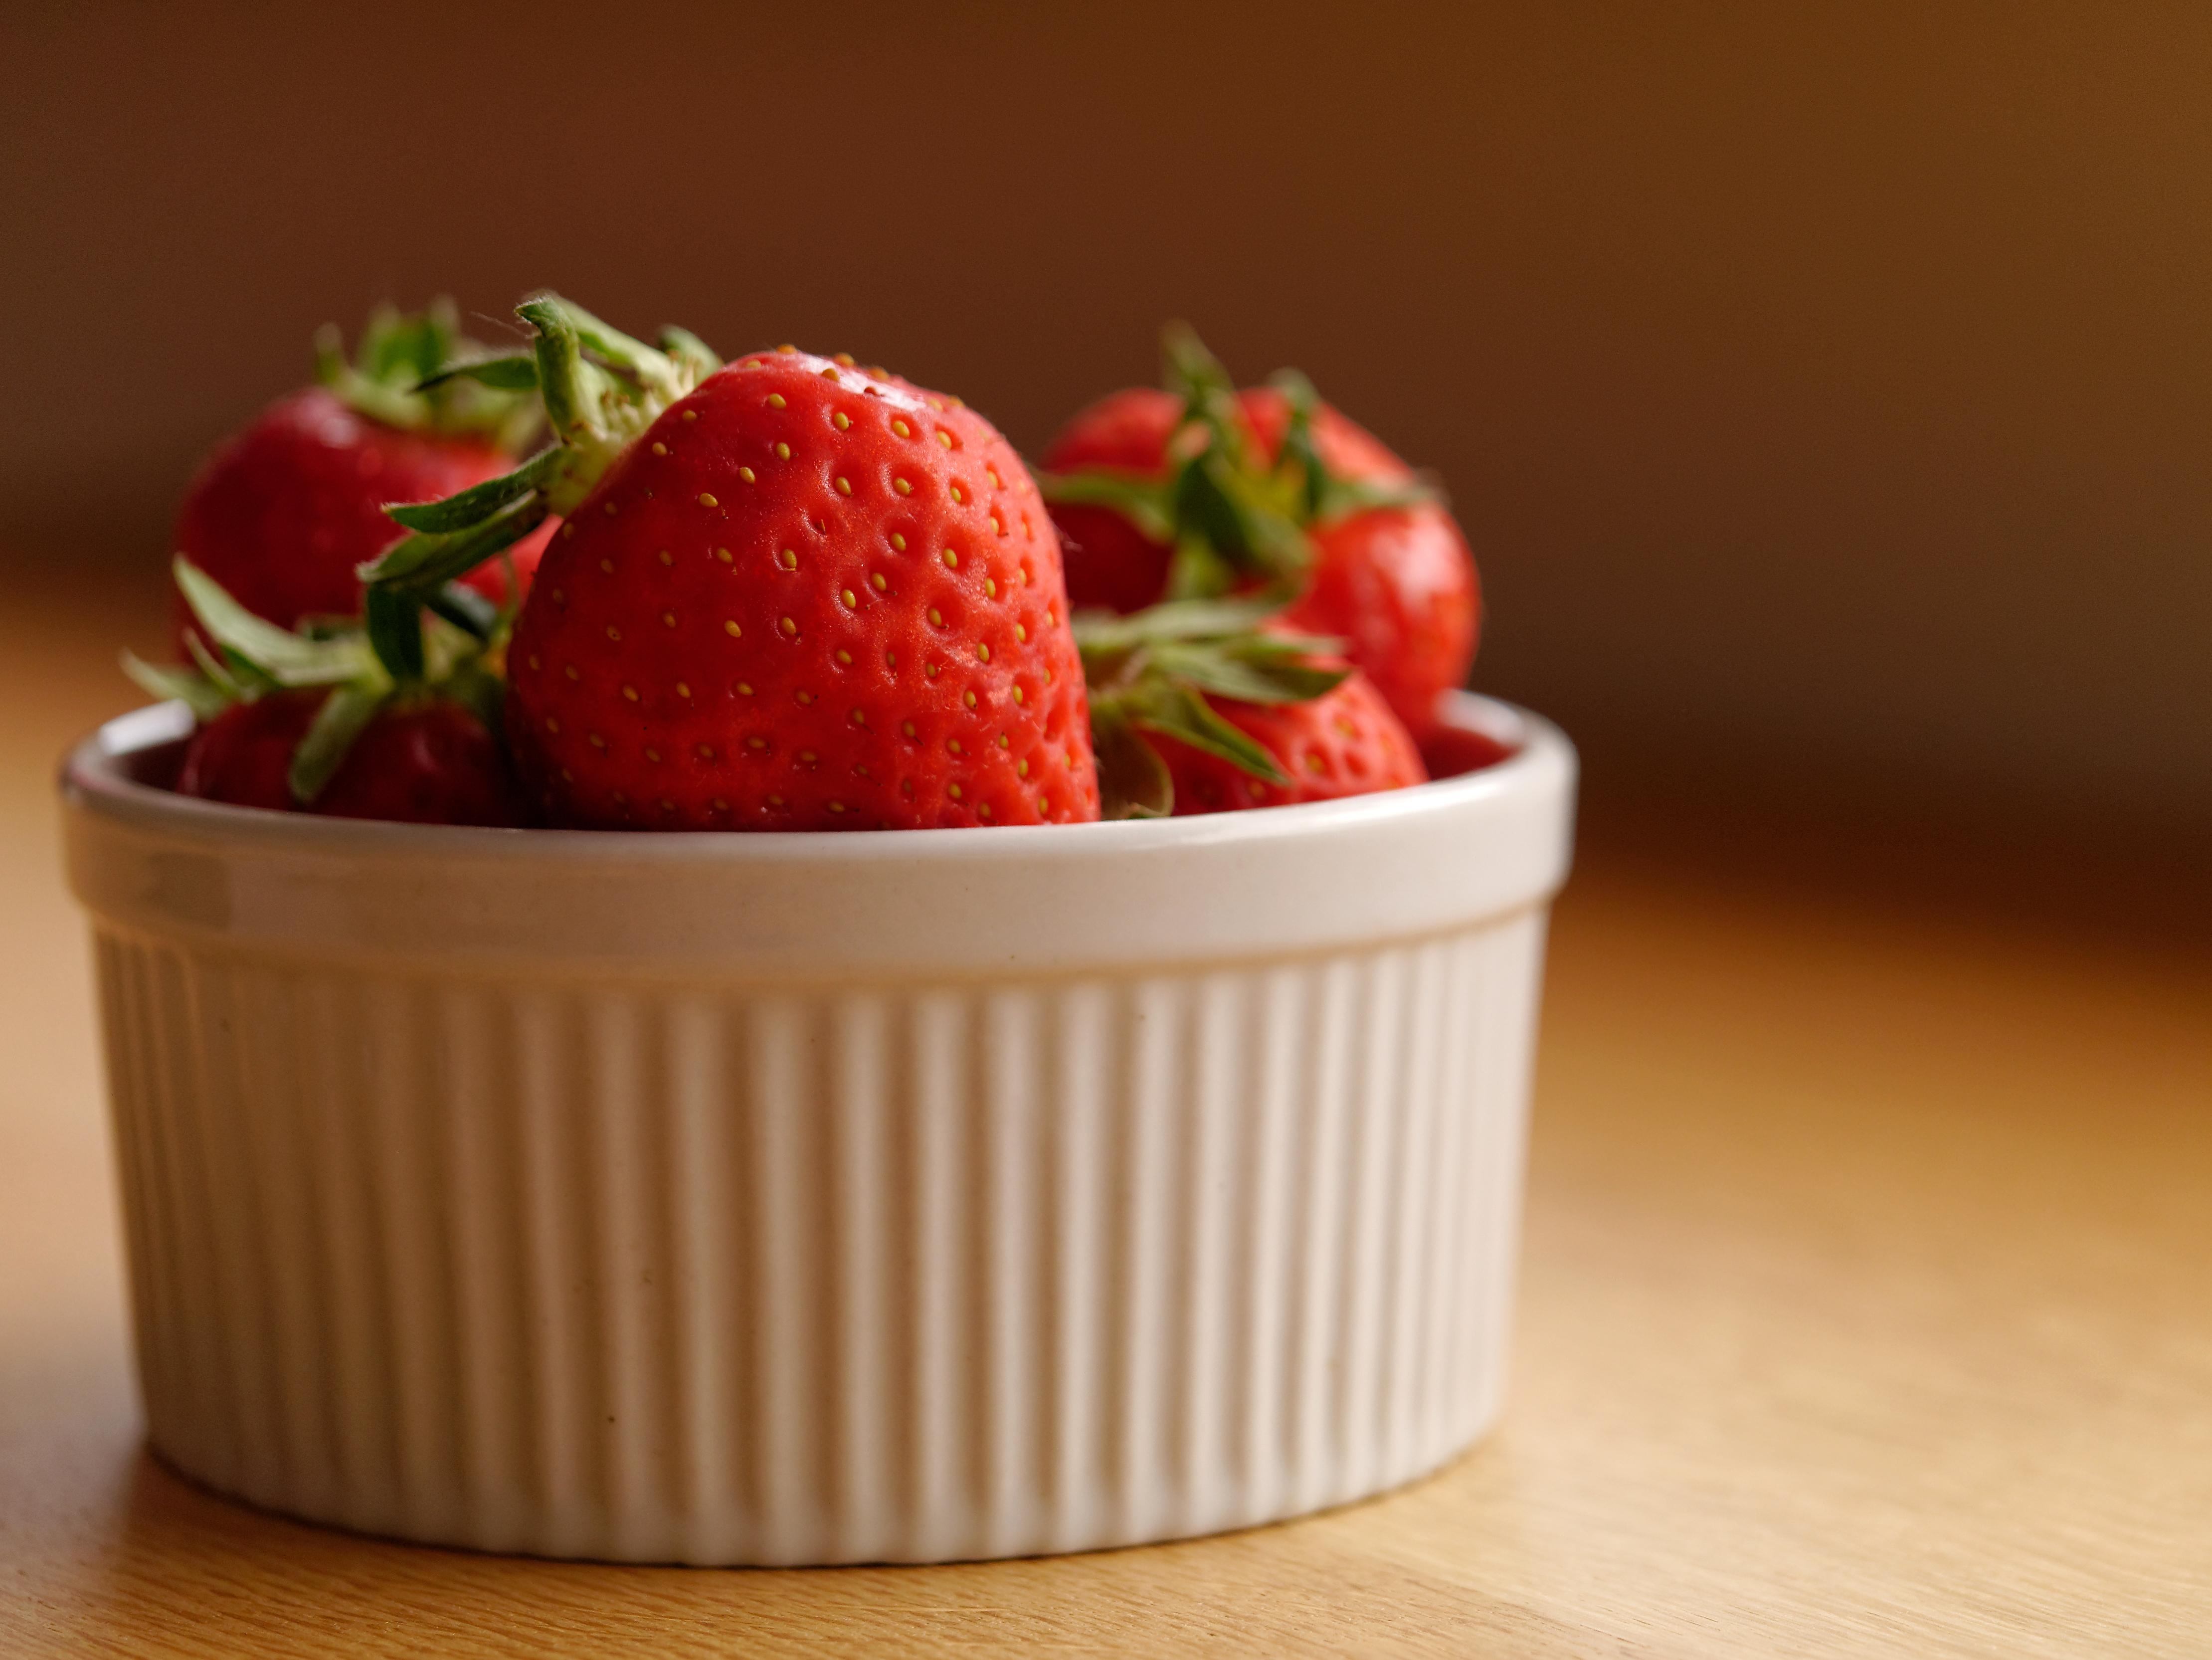 Strawberries pack vitamins, antioxidants and fewer calories than other sweet treats.